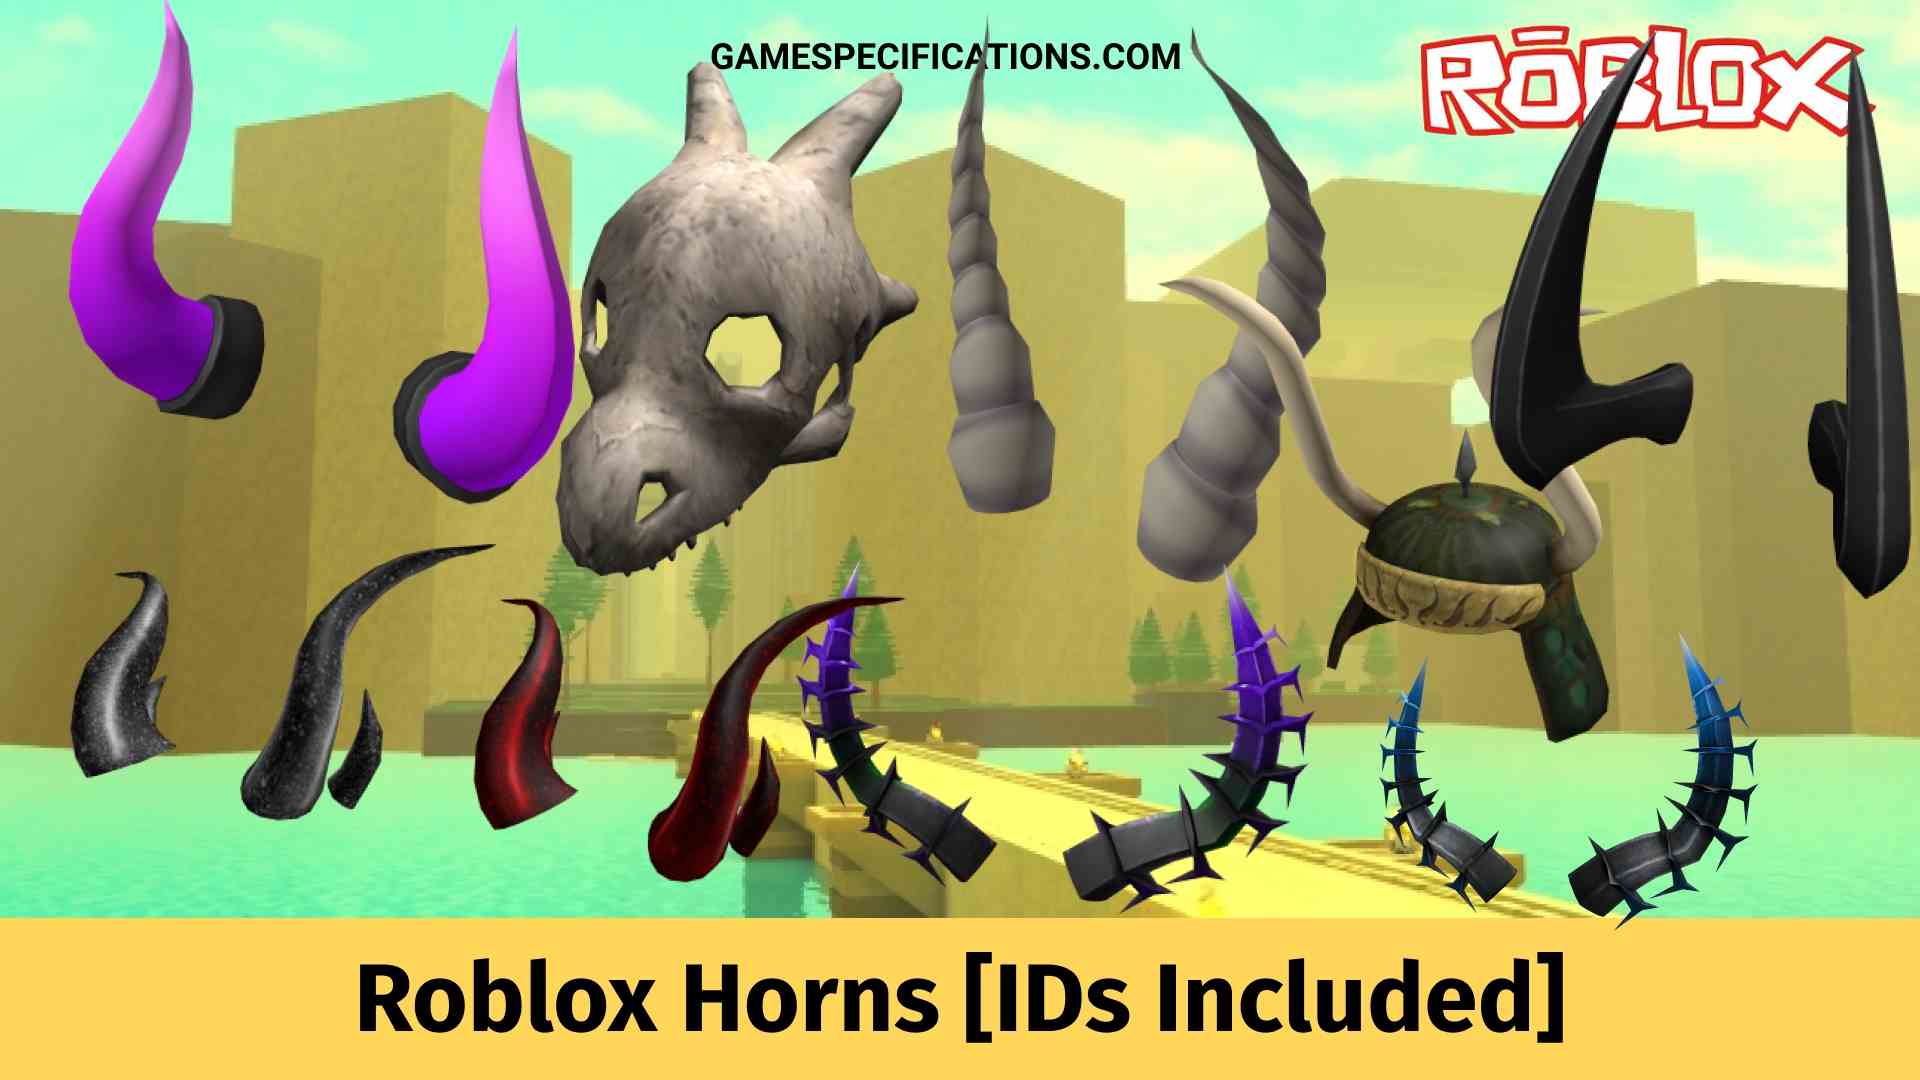 23 Roblox Horns To Awesome Devilish Look Ids Included Game Specifications - 1000 rounds roblox id